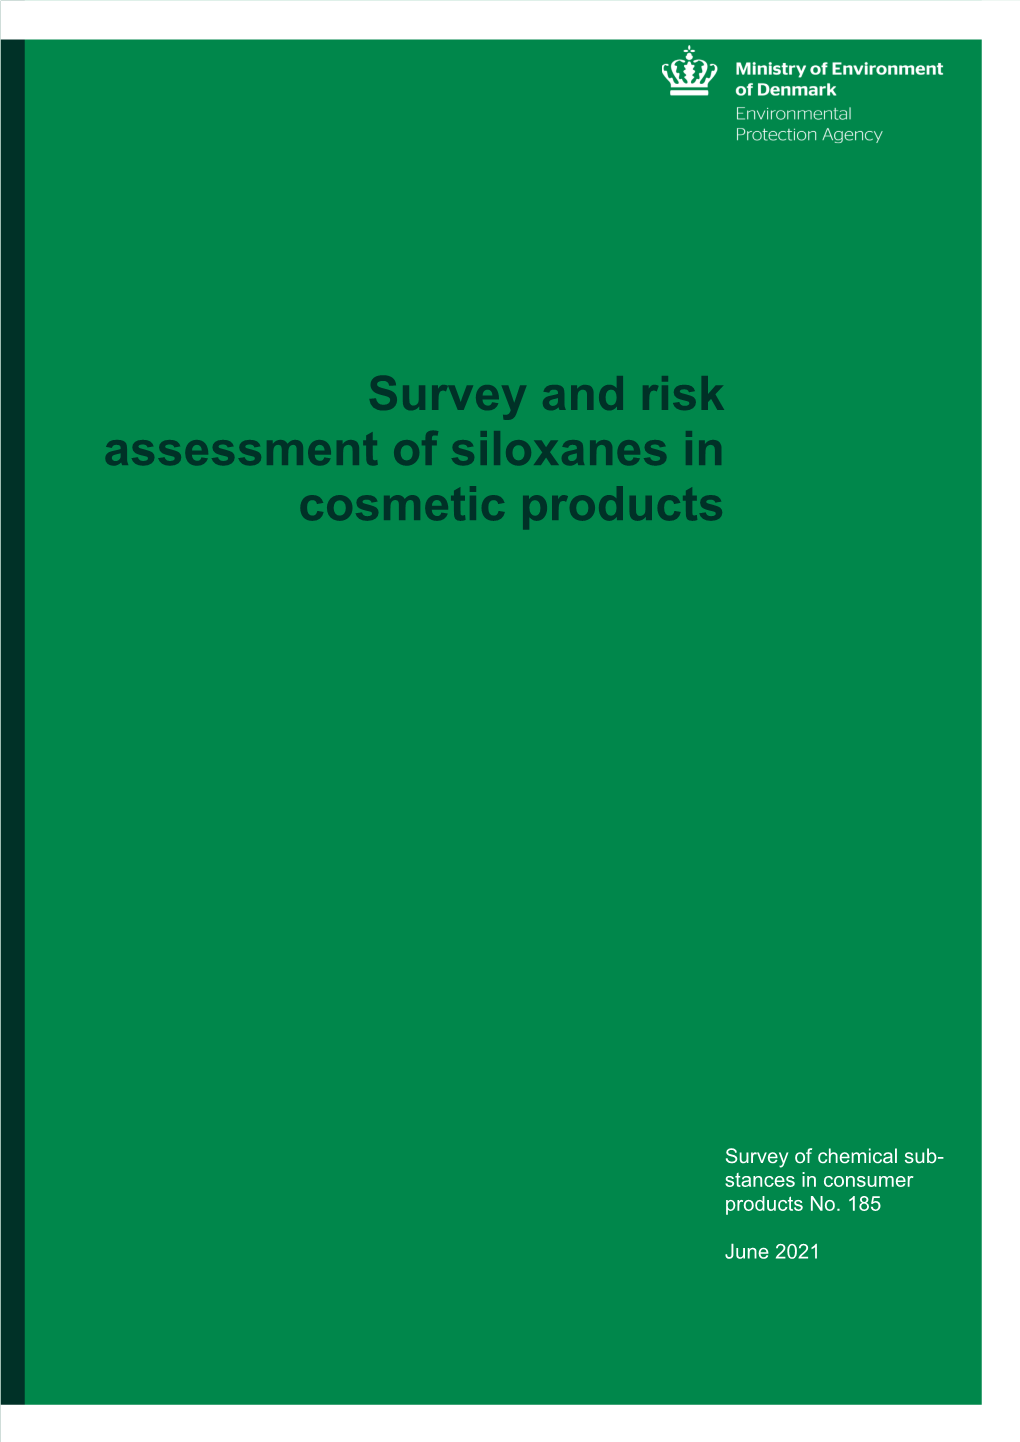 Survey and Risk Assessment of Siloxanes in Cosmetic Products